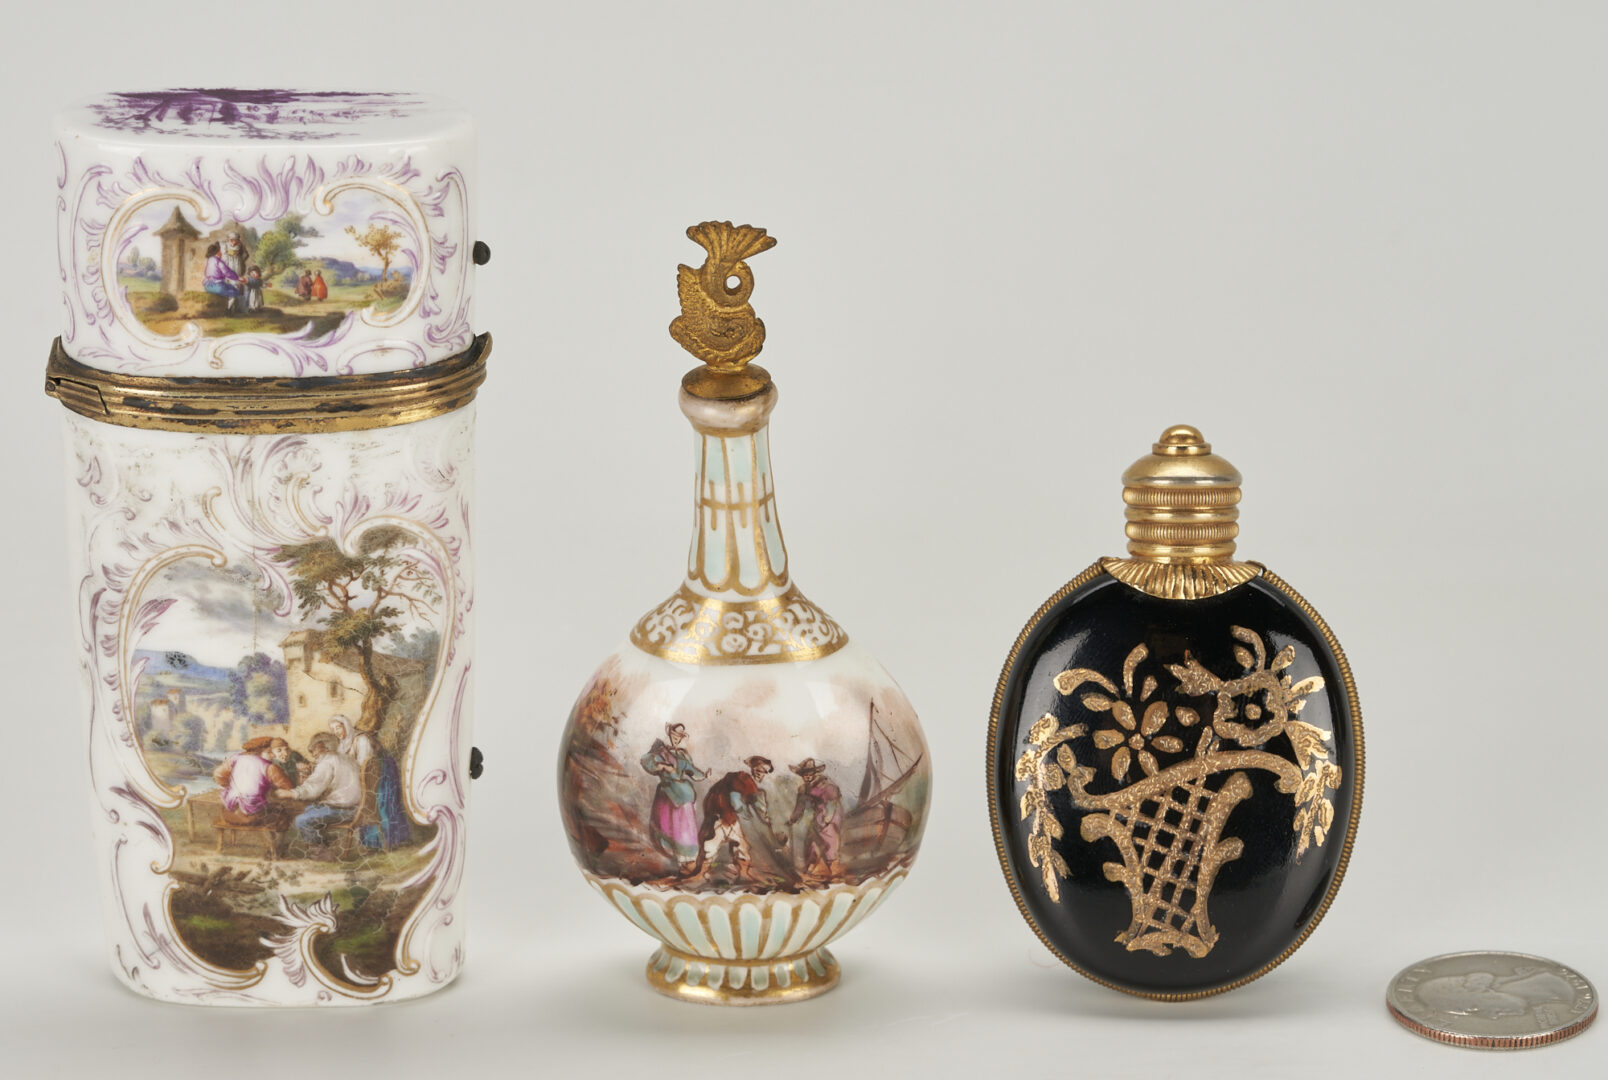 Lot 856: 5 Continental Porcelain Items Incl Armorial Dishes, Needle Case, and 2 Perfume Bottles